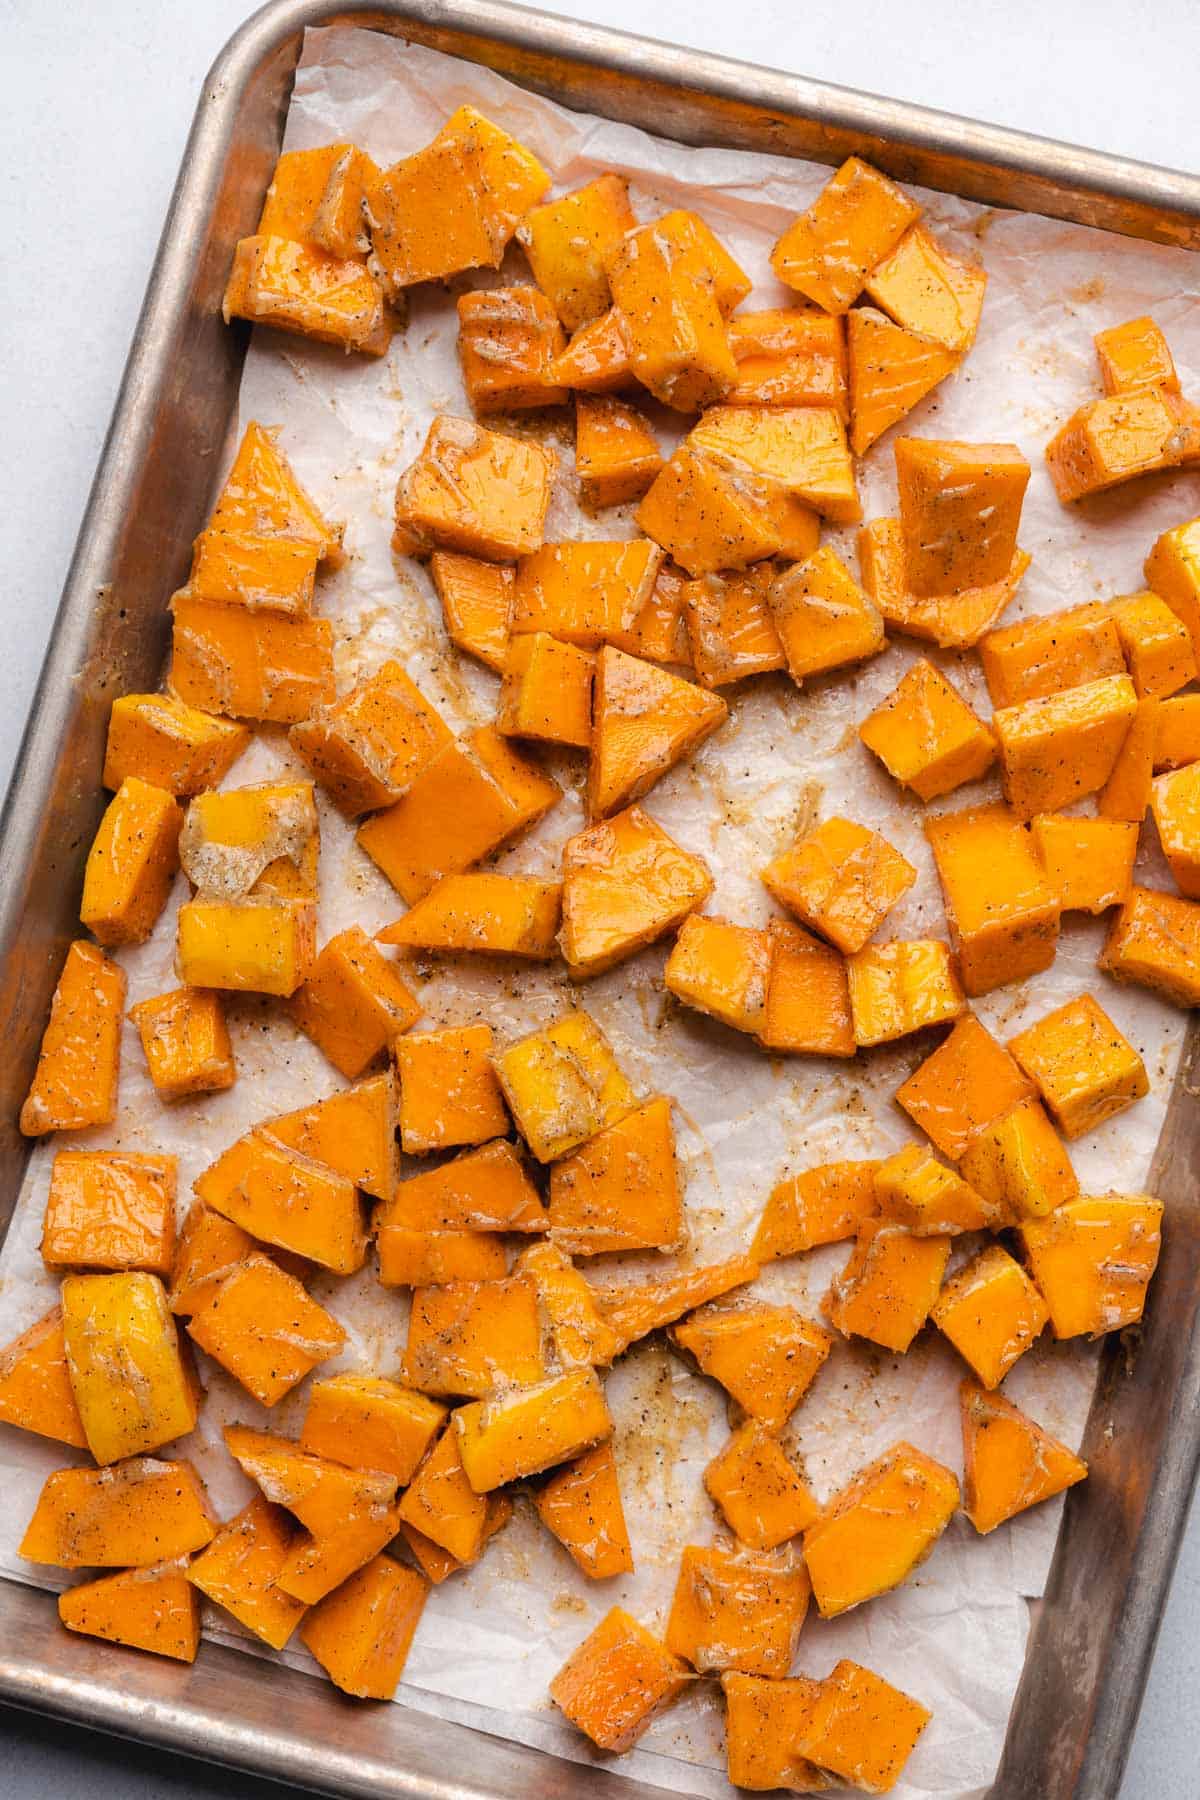 butternut squash coated with butter and seasonings on a parchment lined baking sheet